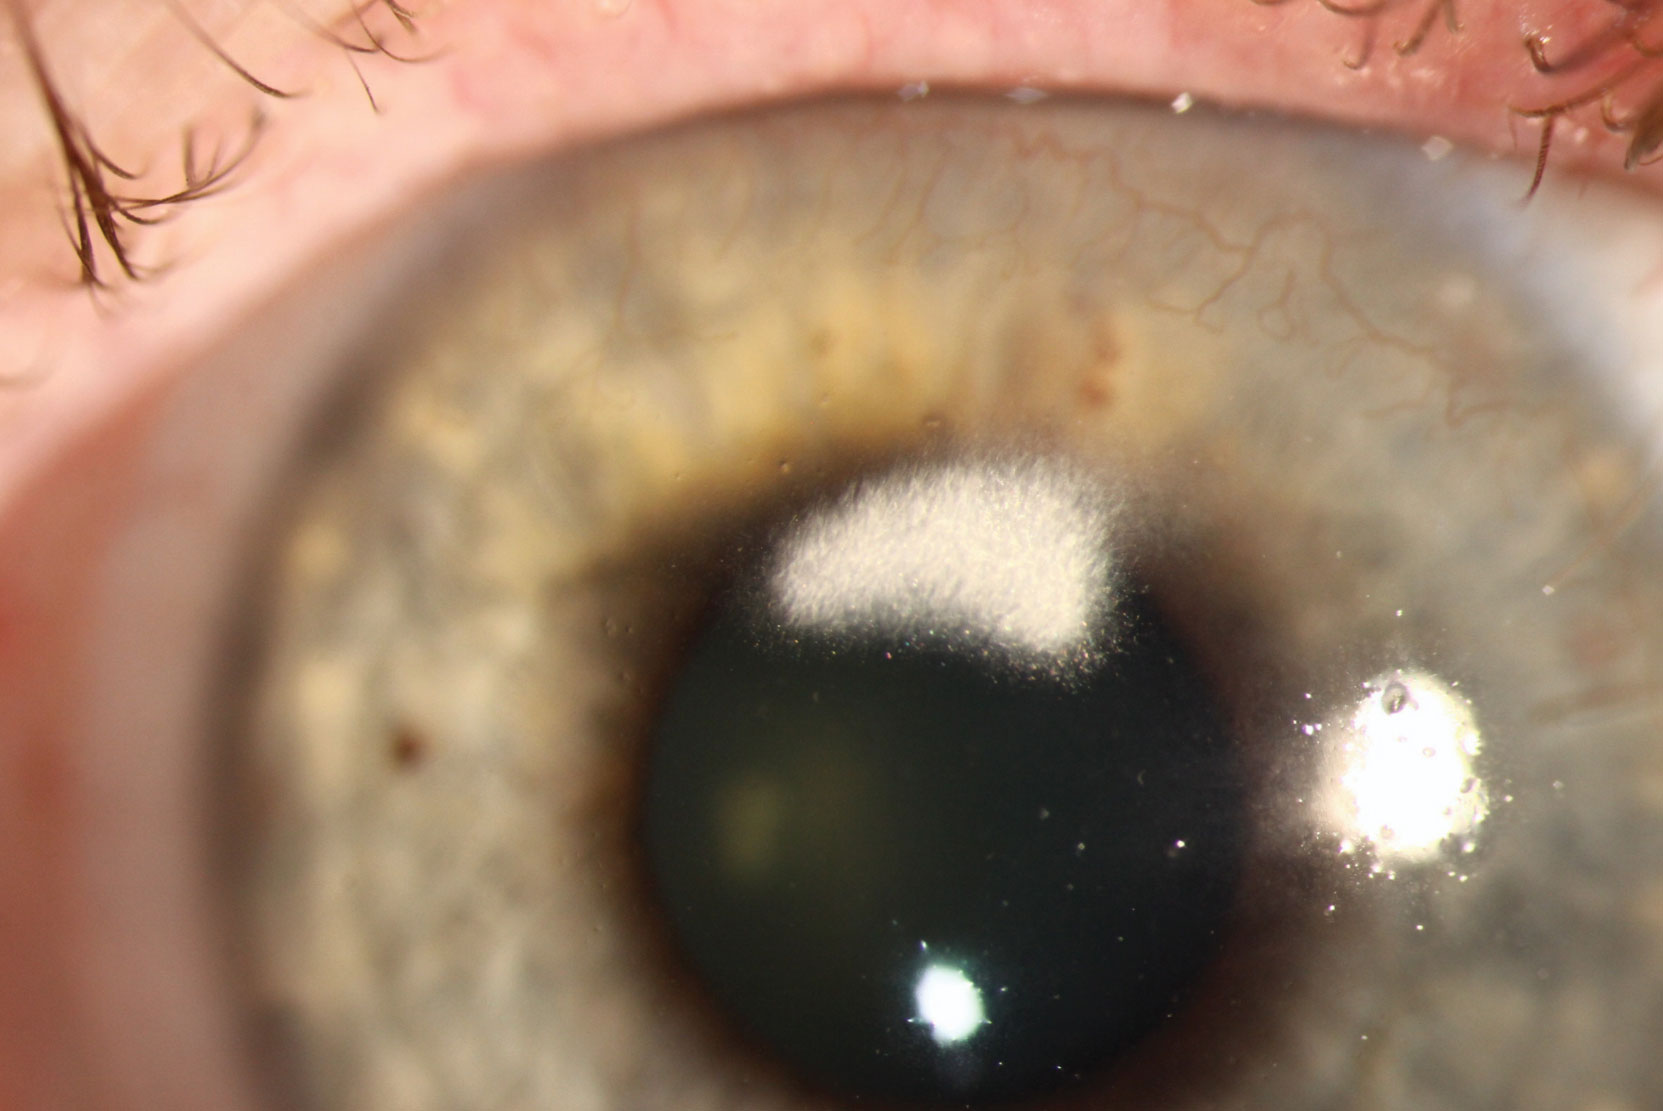 Feathery-looking corneal scars are a common response to infections, injuries and surgeries. 